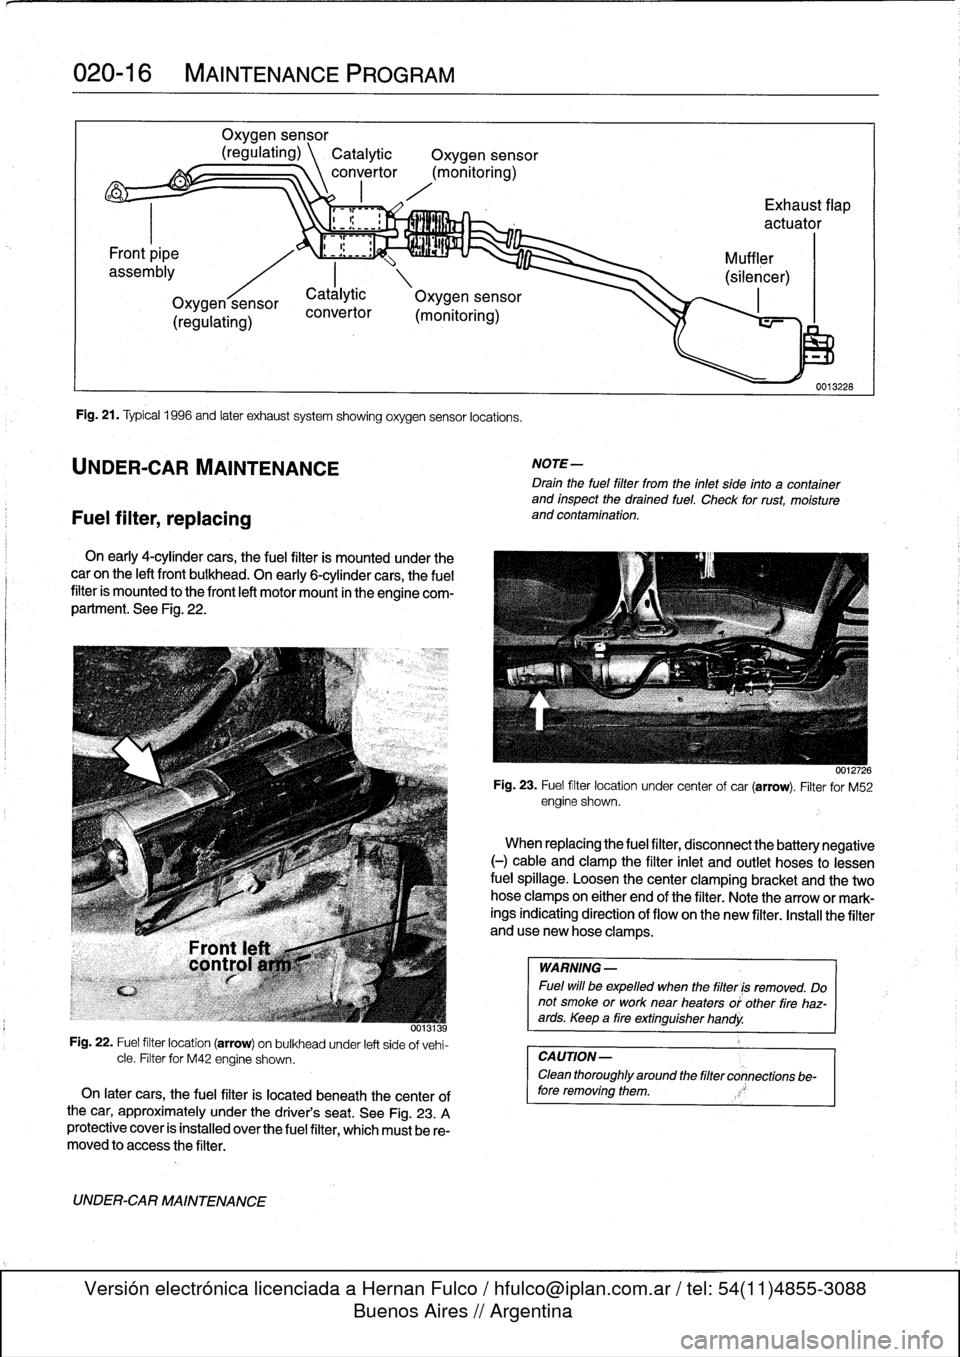 BMW 325i 1992 E36 User Guide 
020-
1
6

	

MAINTENANCE
PROGRAM

Fuel
filter,
replacing

Oxygen
sensor

(regulating)
\
Catalytic

	

Oxygen
sensor
convertor
(monitoring)

Fig
.
21
.
Typical
1996
and
later
exhaust
system
showing
ox